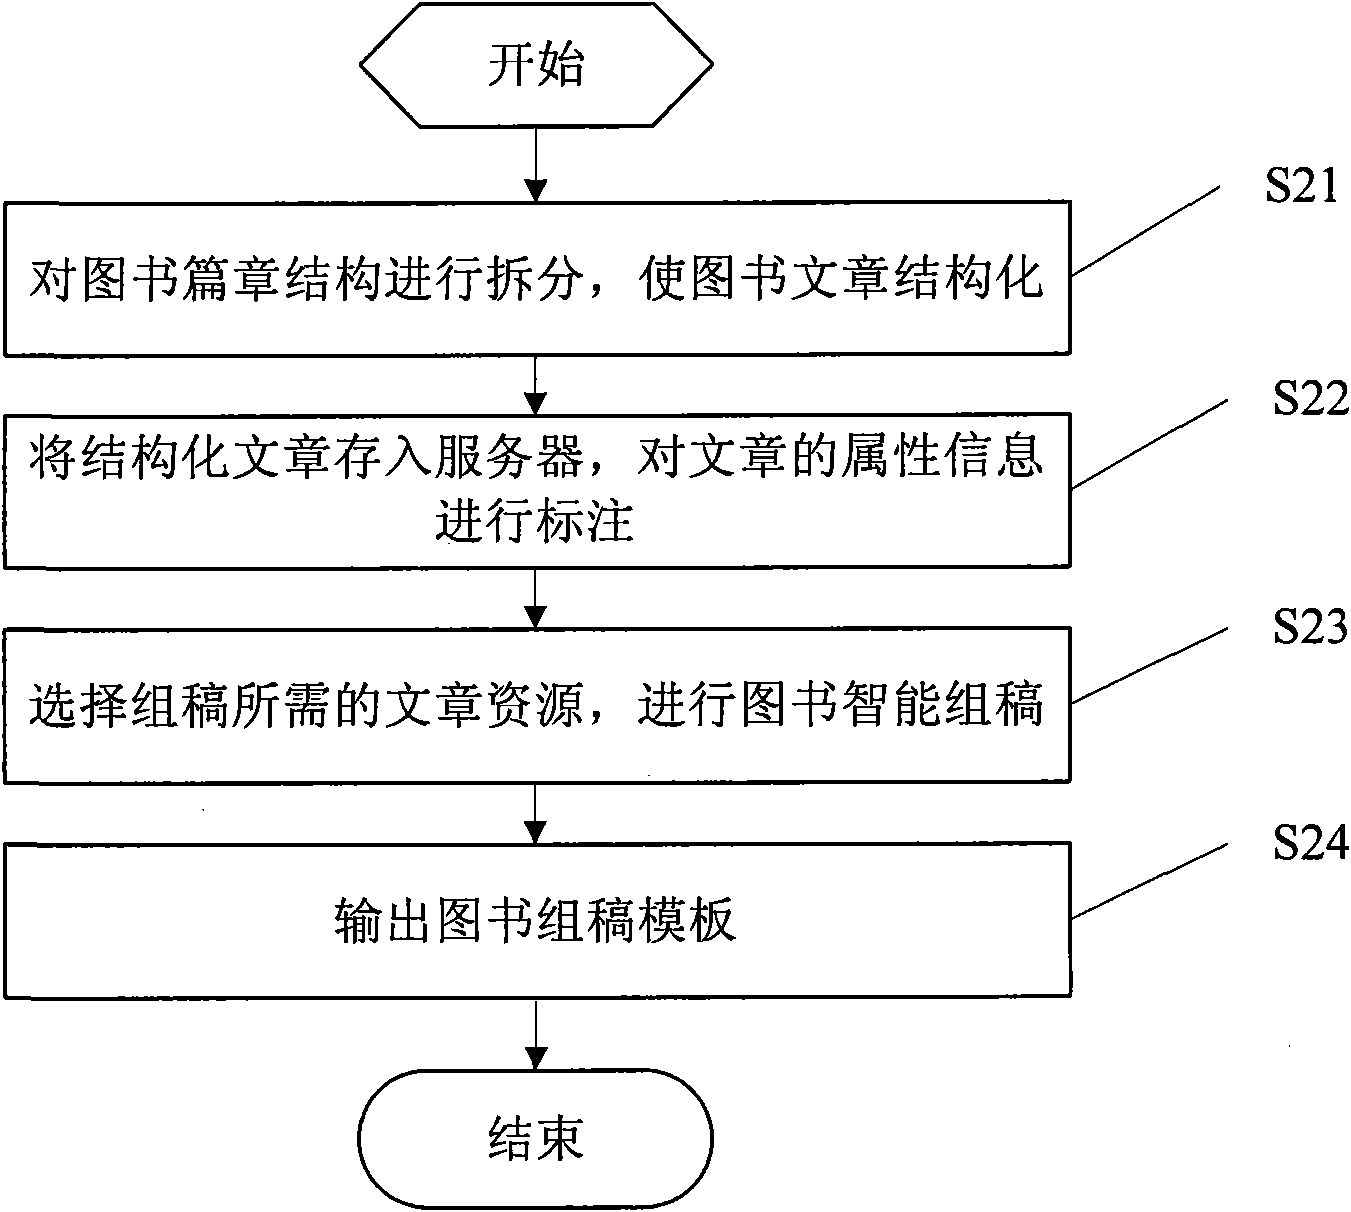 Method and system for realizing automatic acquisition and on-demand printing of book